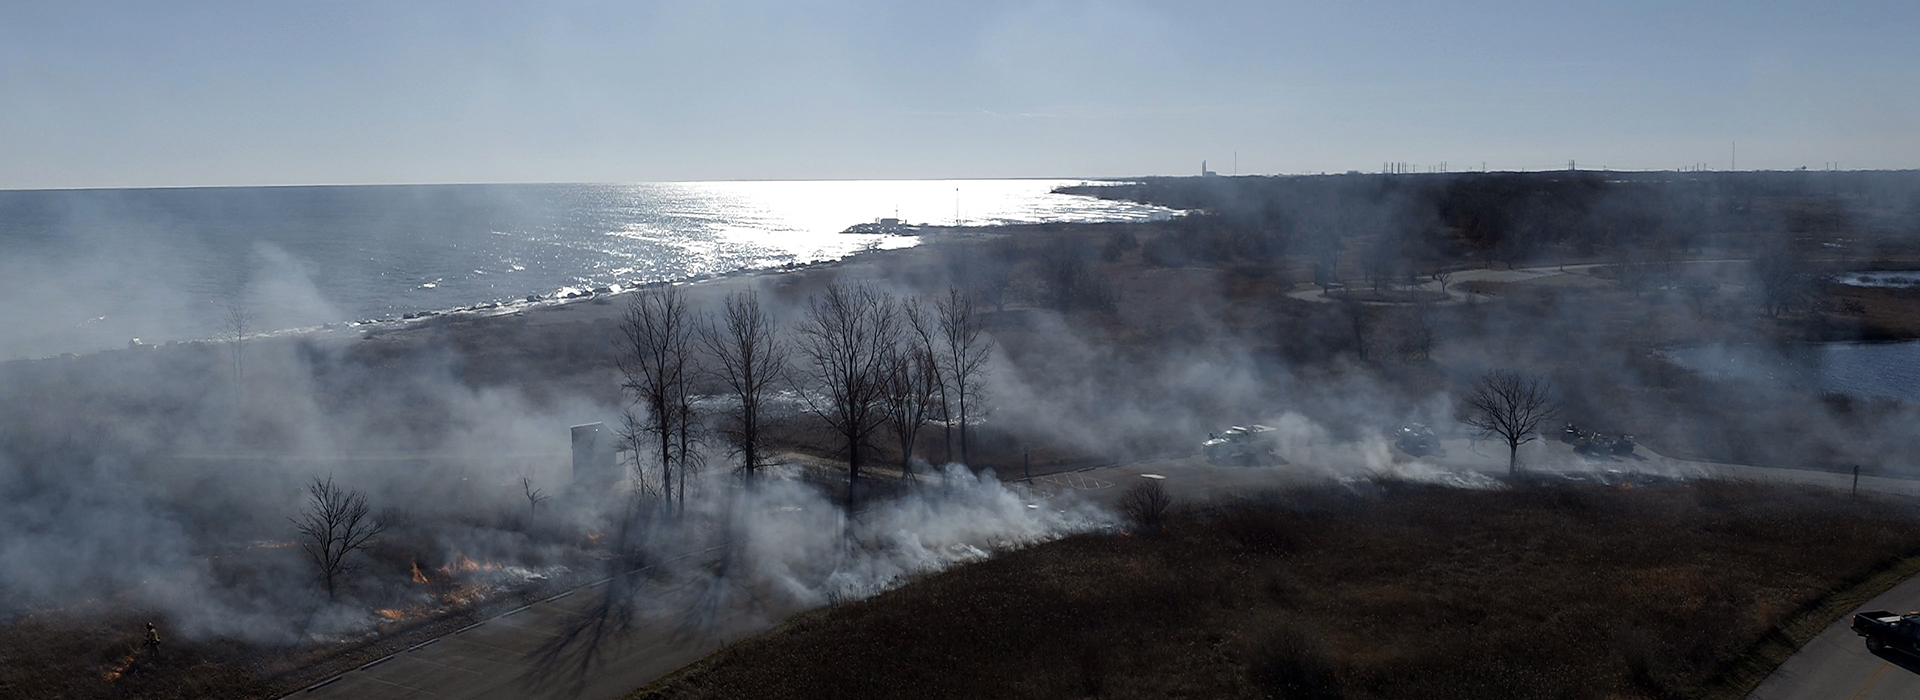 Drone Arrival at prescribed fire at Illinois state park